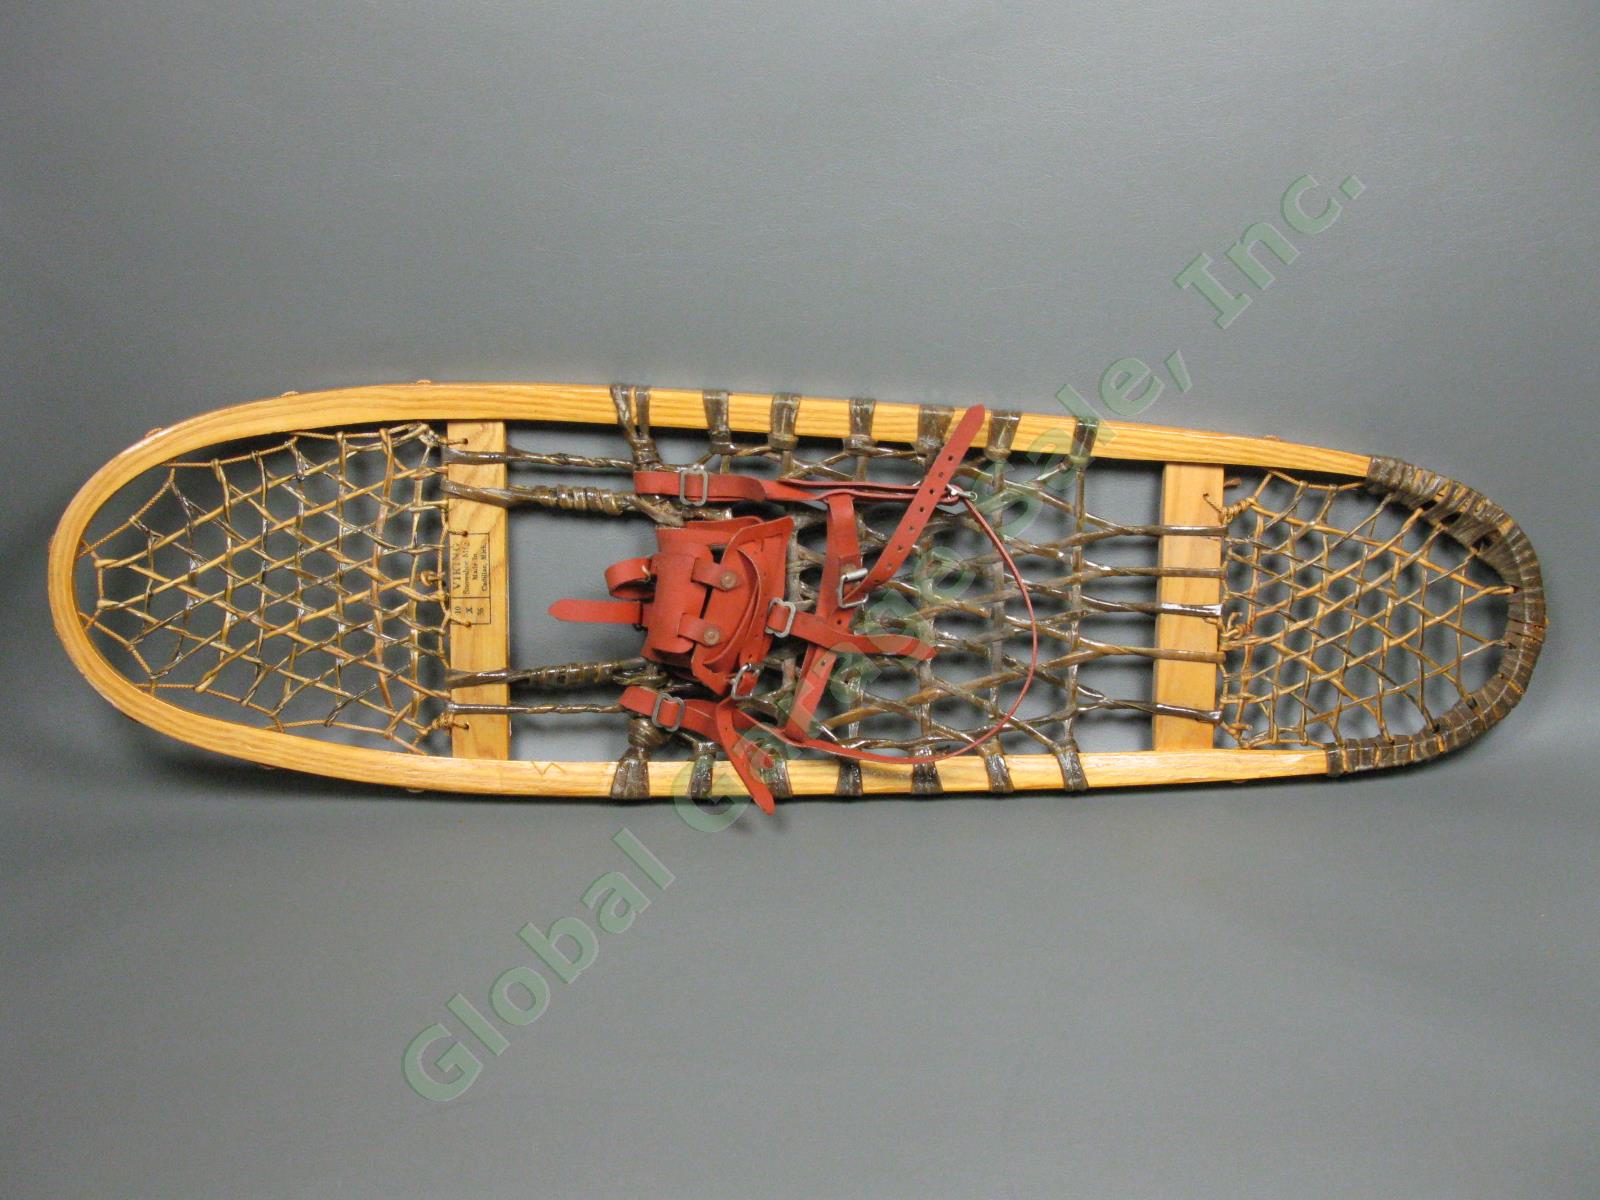 Vintage Viking Wooden Snowshoes 10"x36" Cadillac Michigan Cabin Decor MINT COND 8